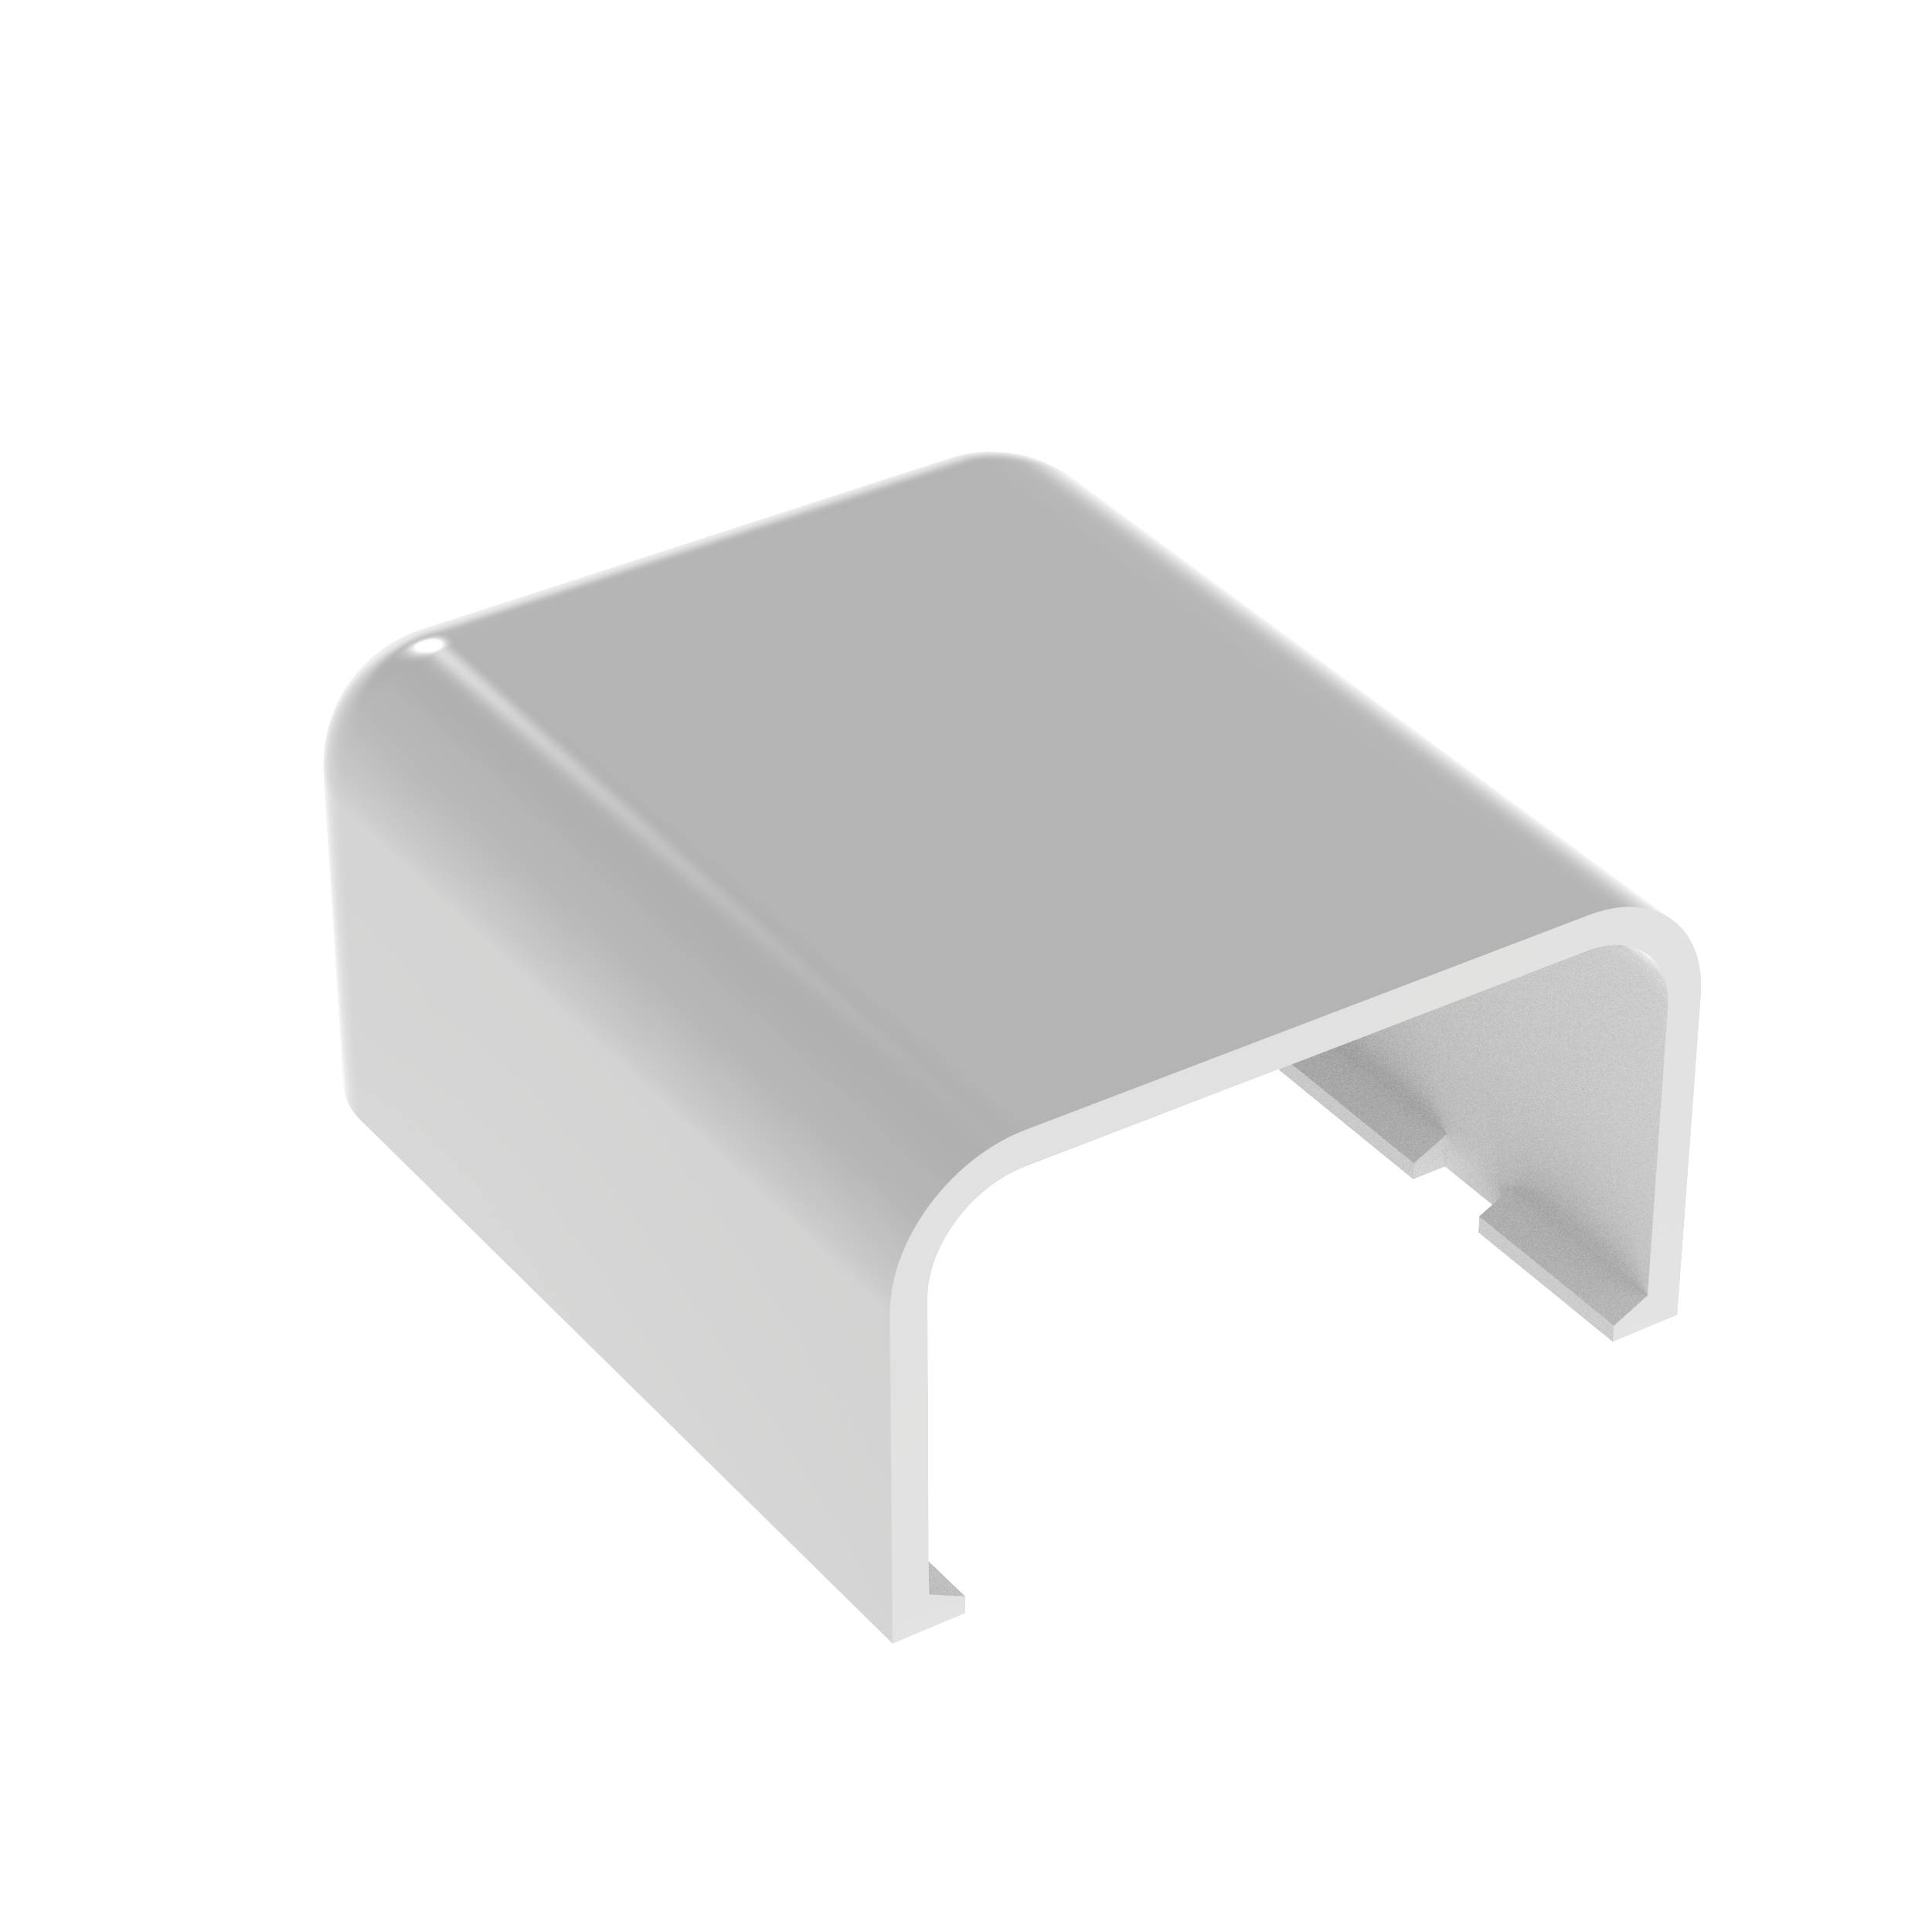 Panduit® Pan-Way® ECF10WH-X Low Voltage End Cap Fitting, For Use With Pan-Way® LD10 Series Surface Raceway System, ABS, White